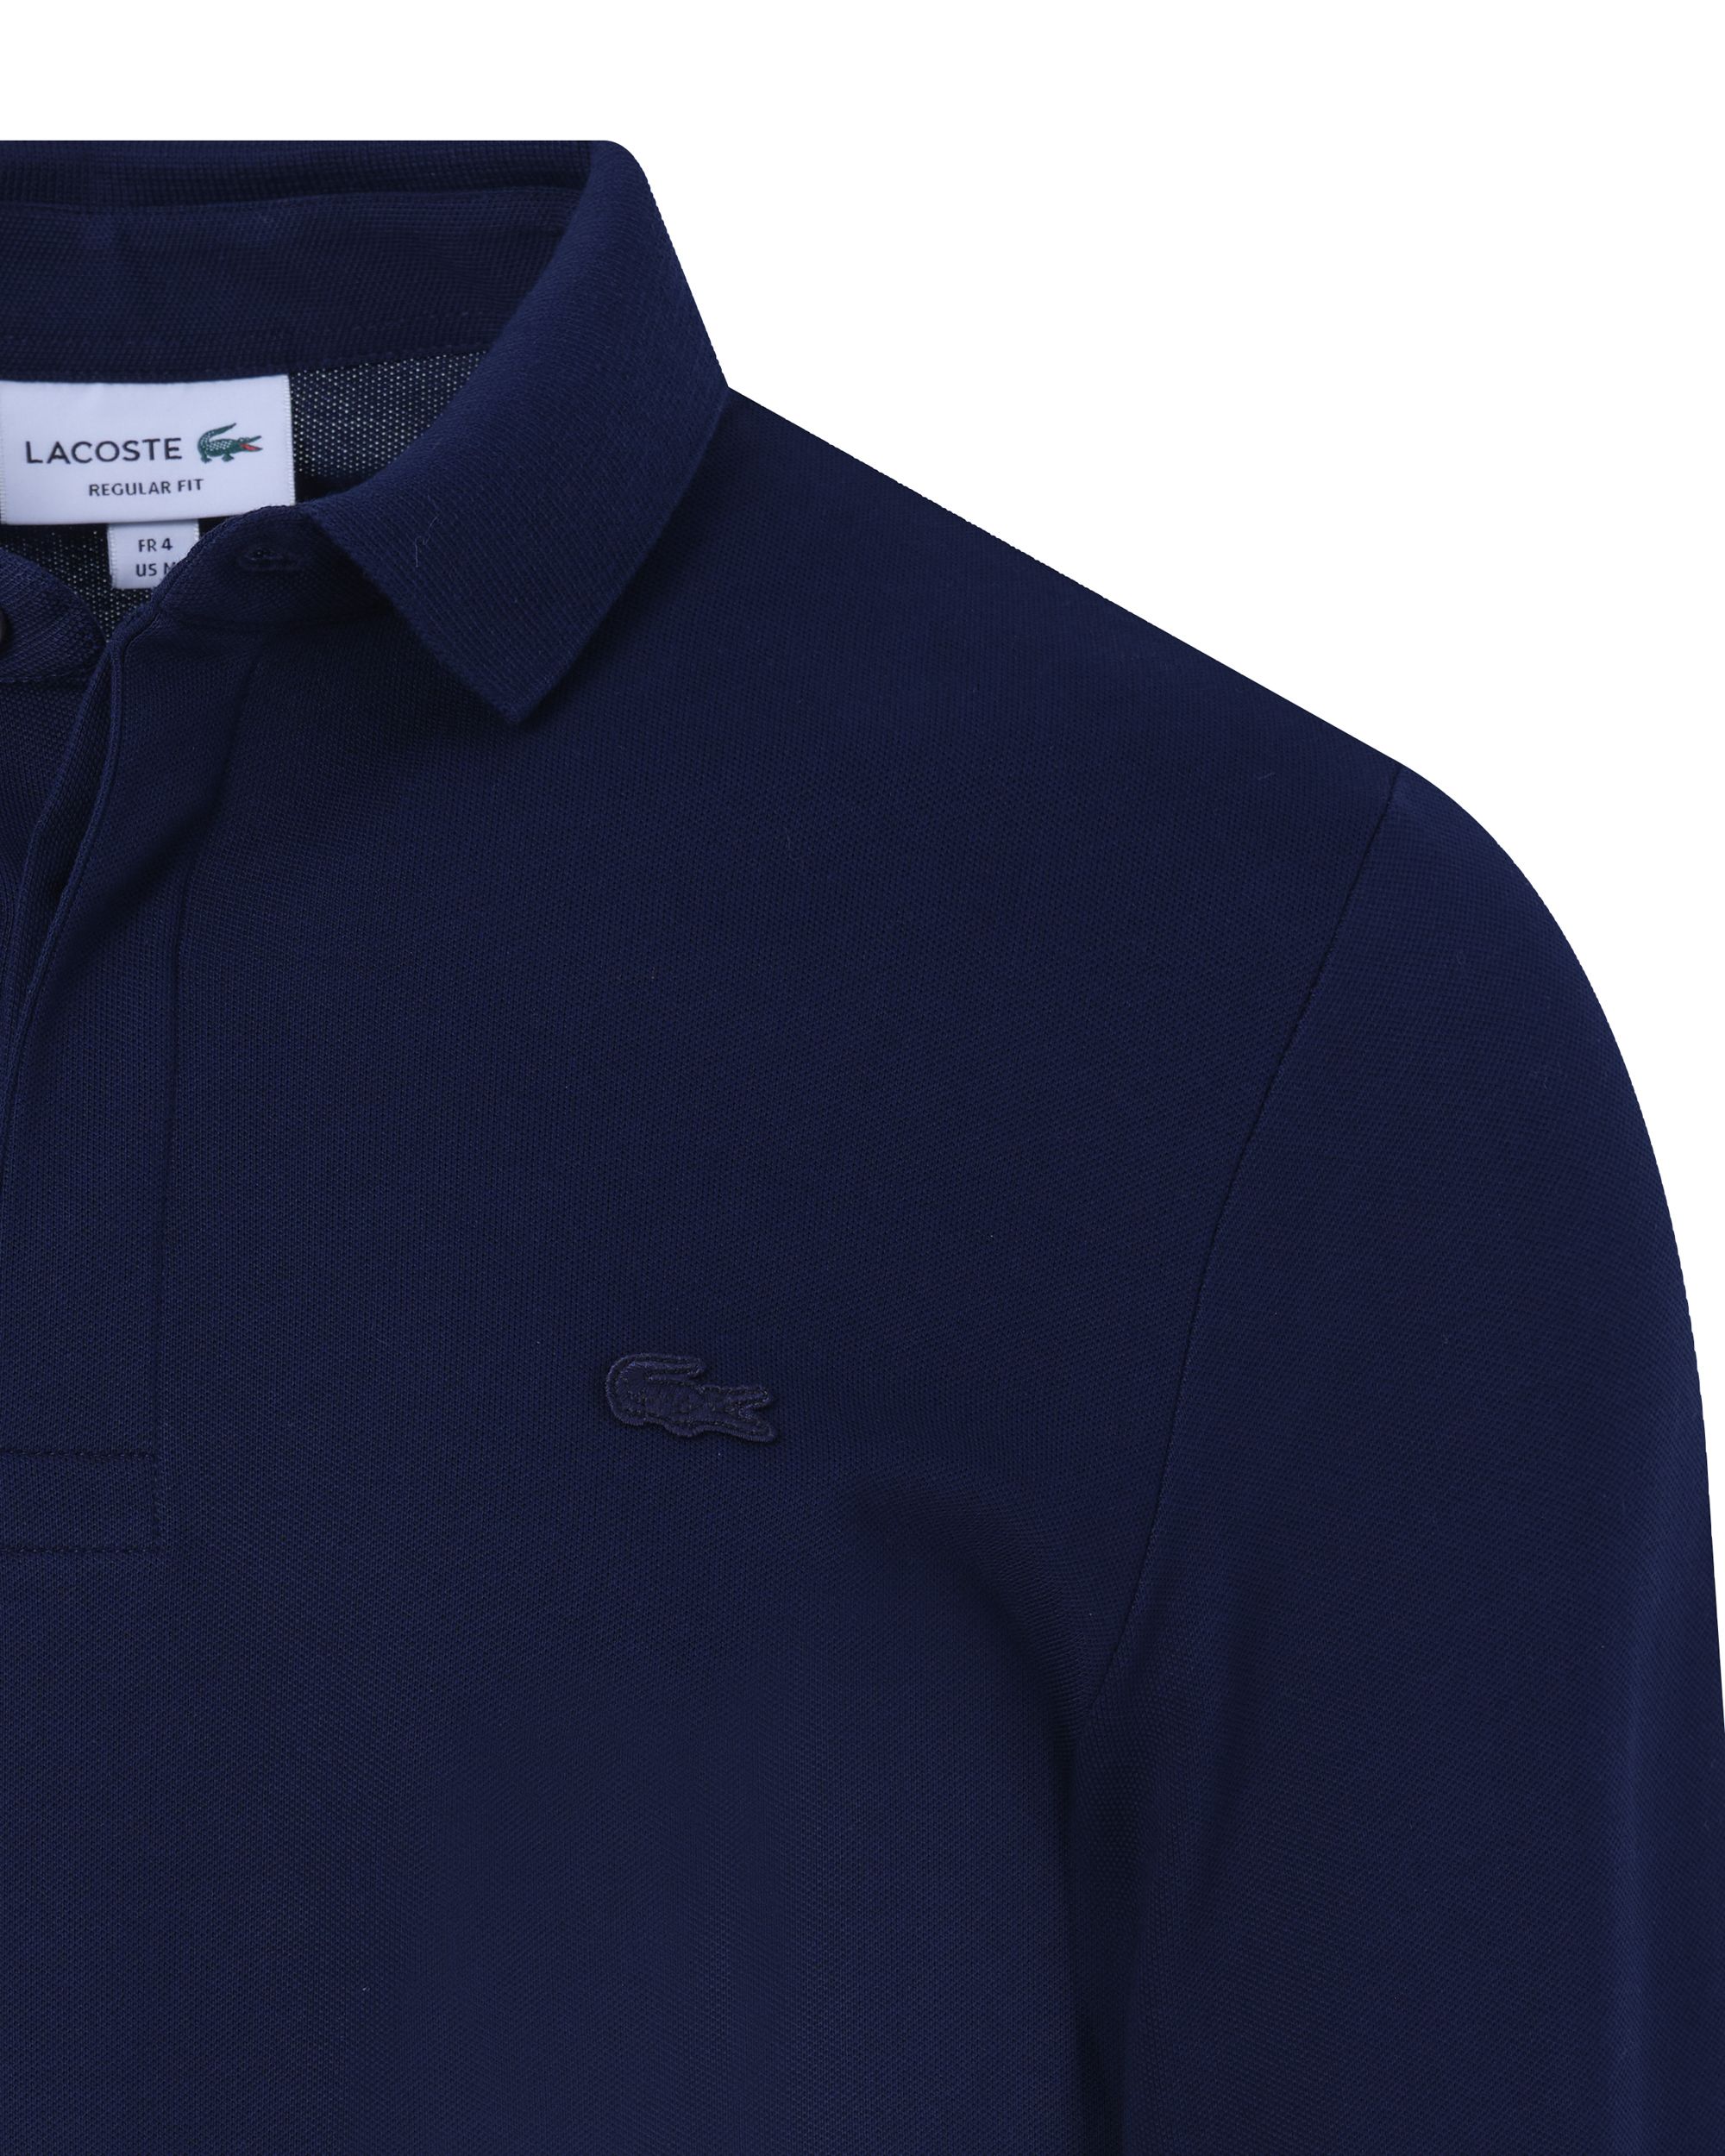 Lacoste Polo LM Donker blauw 086734-001-L